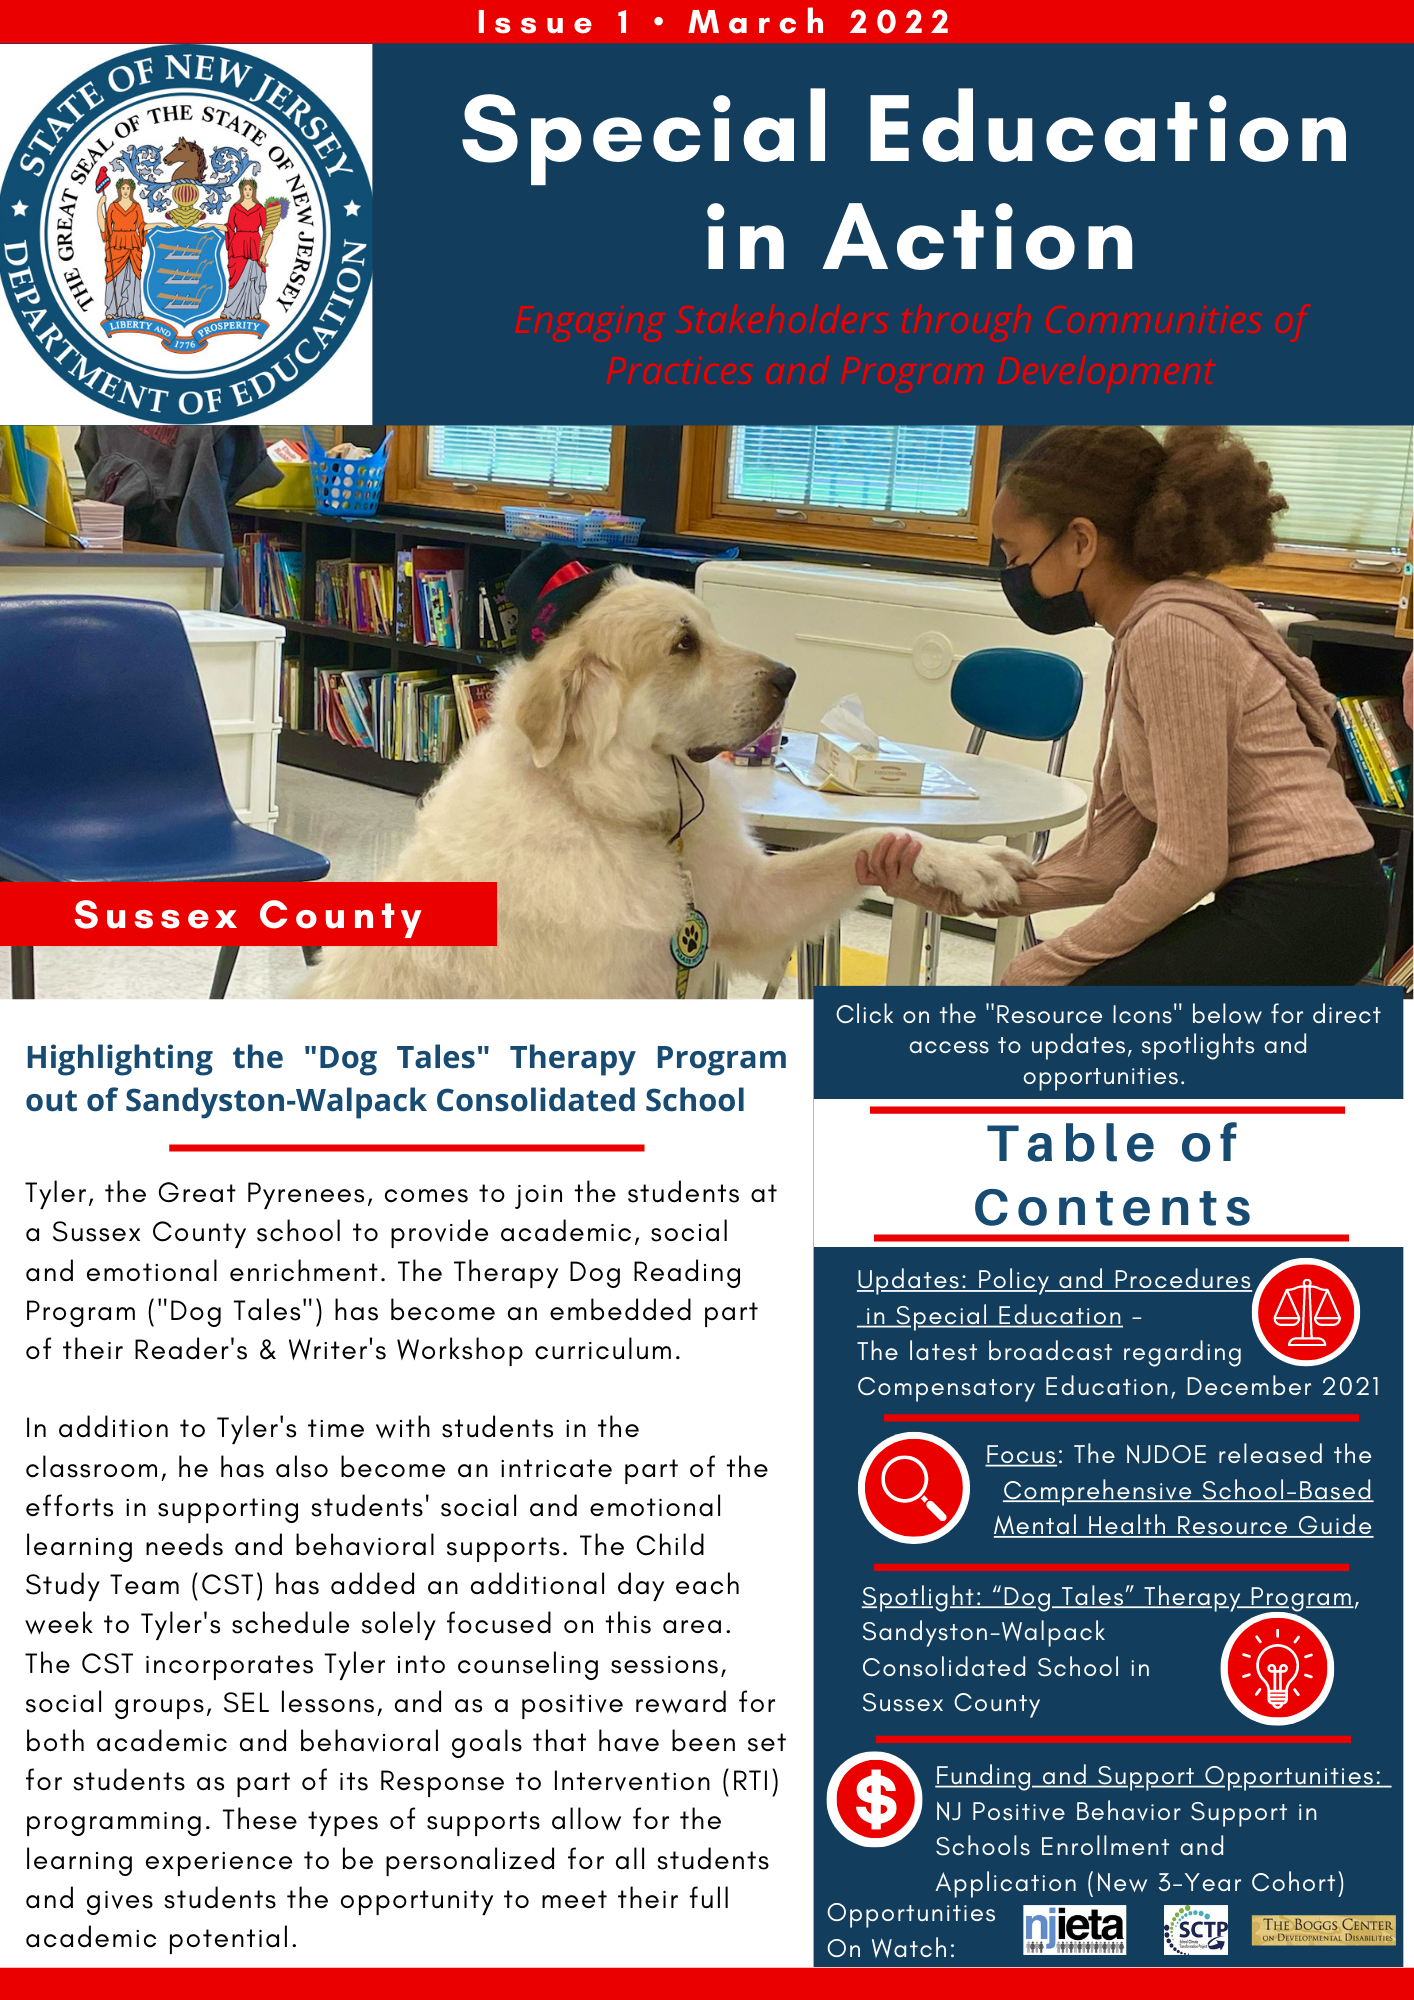 The cover of the 1st issued newsletter for special education in action